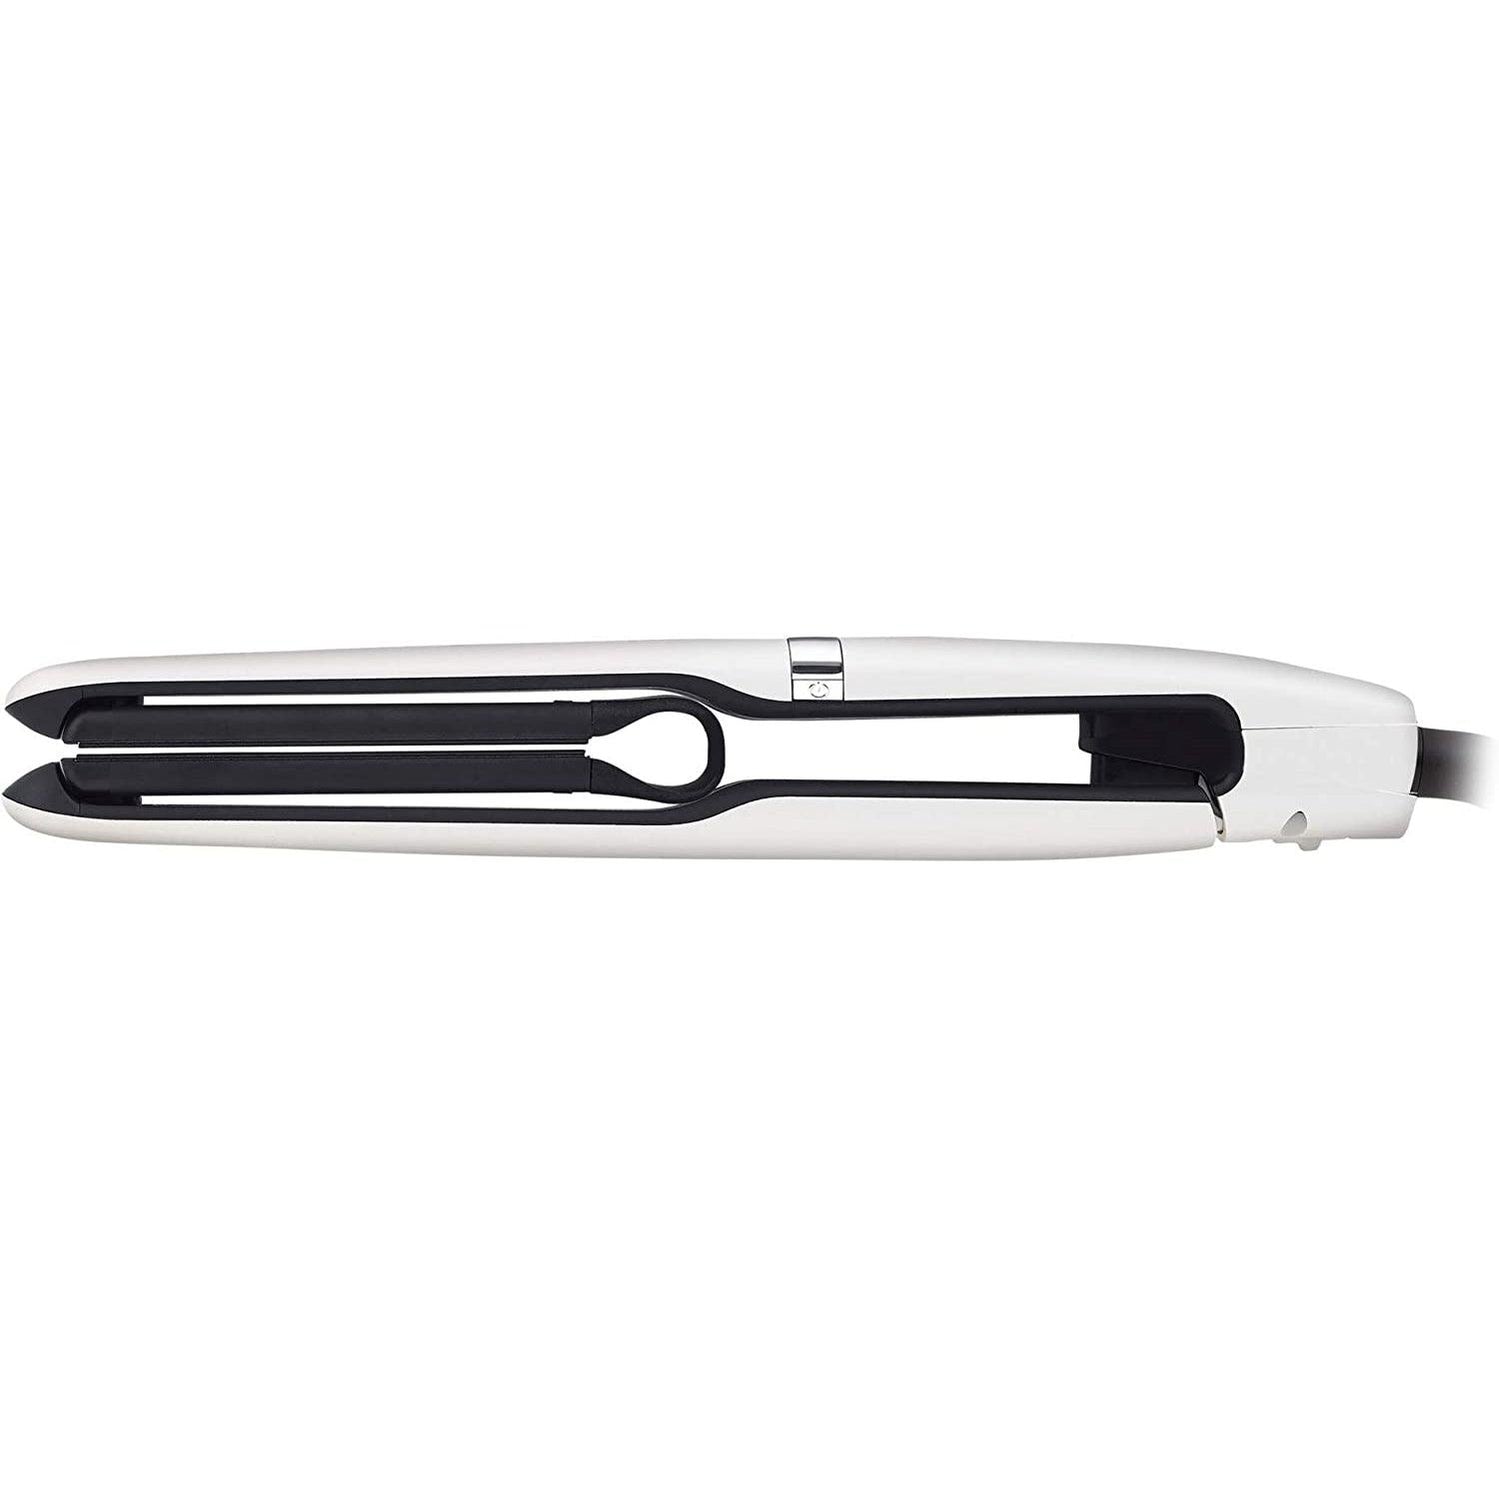 Remington Air Plates Titanium Ceramic Hair Straighteners, Floating Plates for Increased Contact - S7412